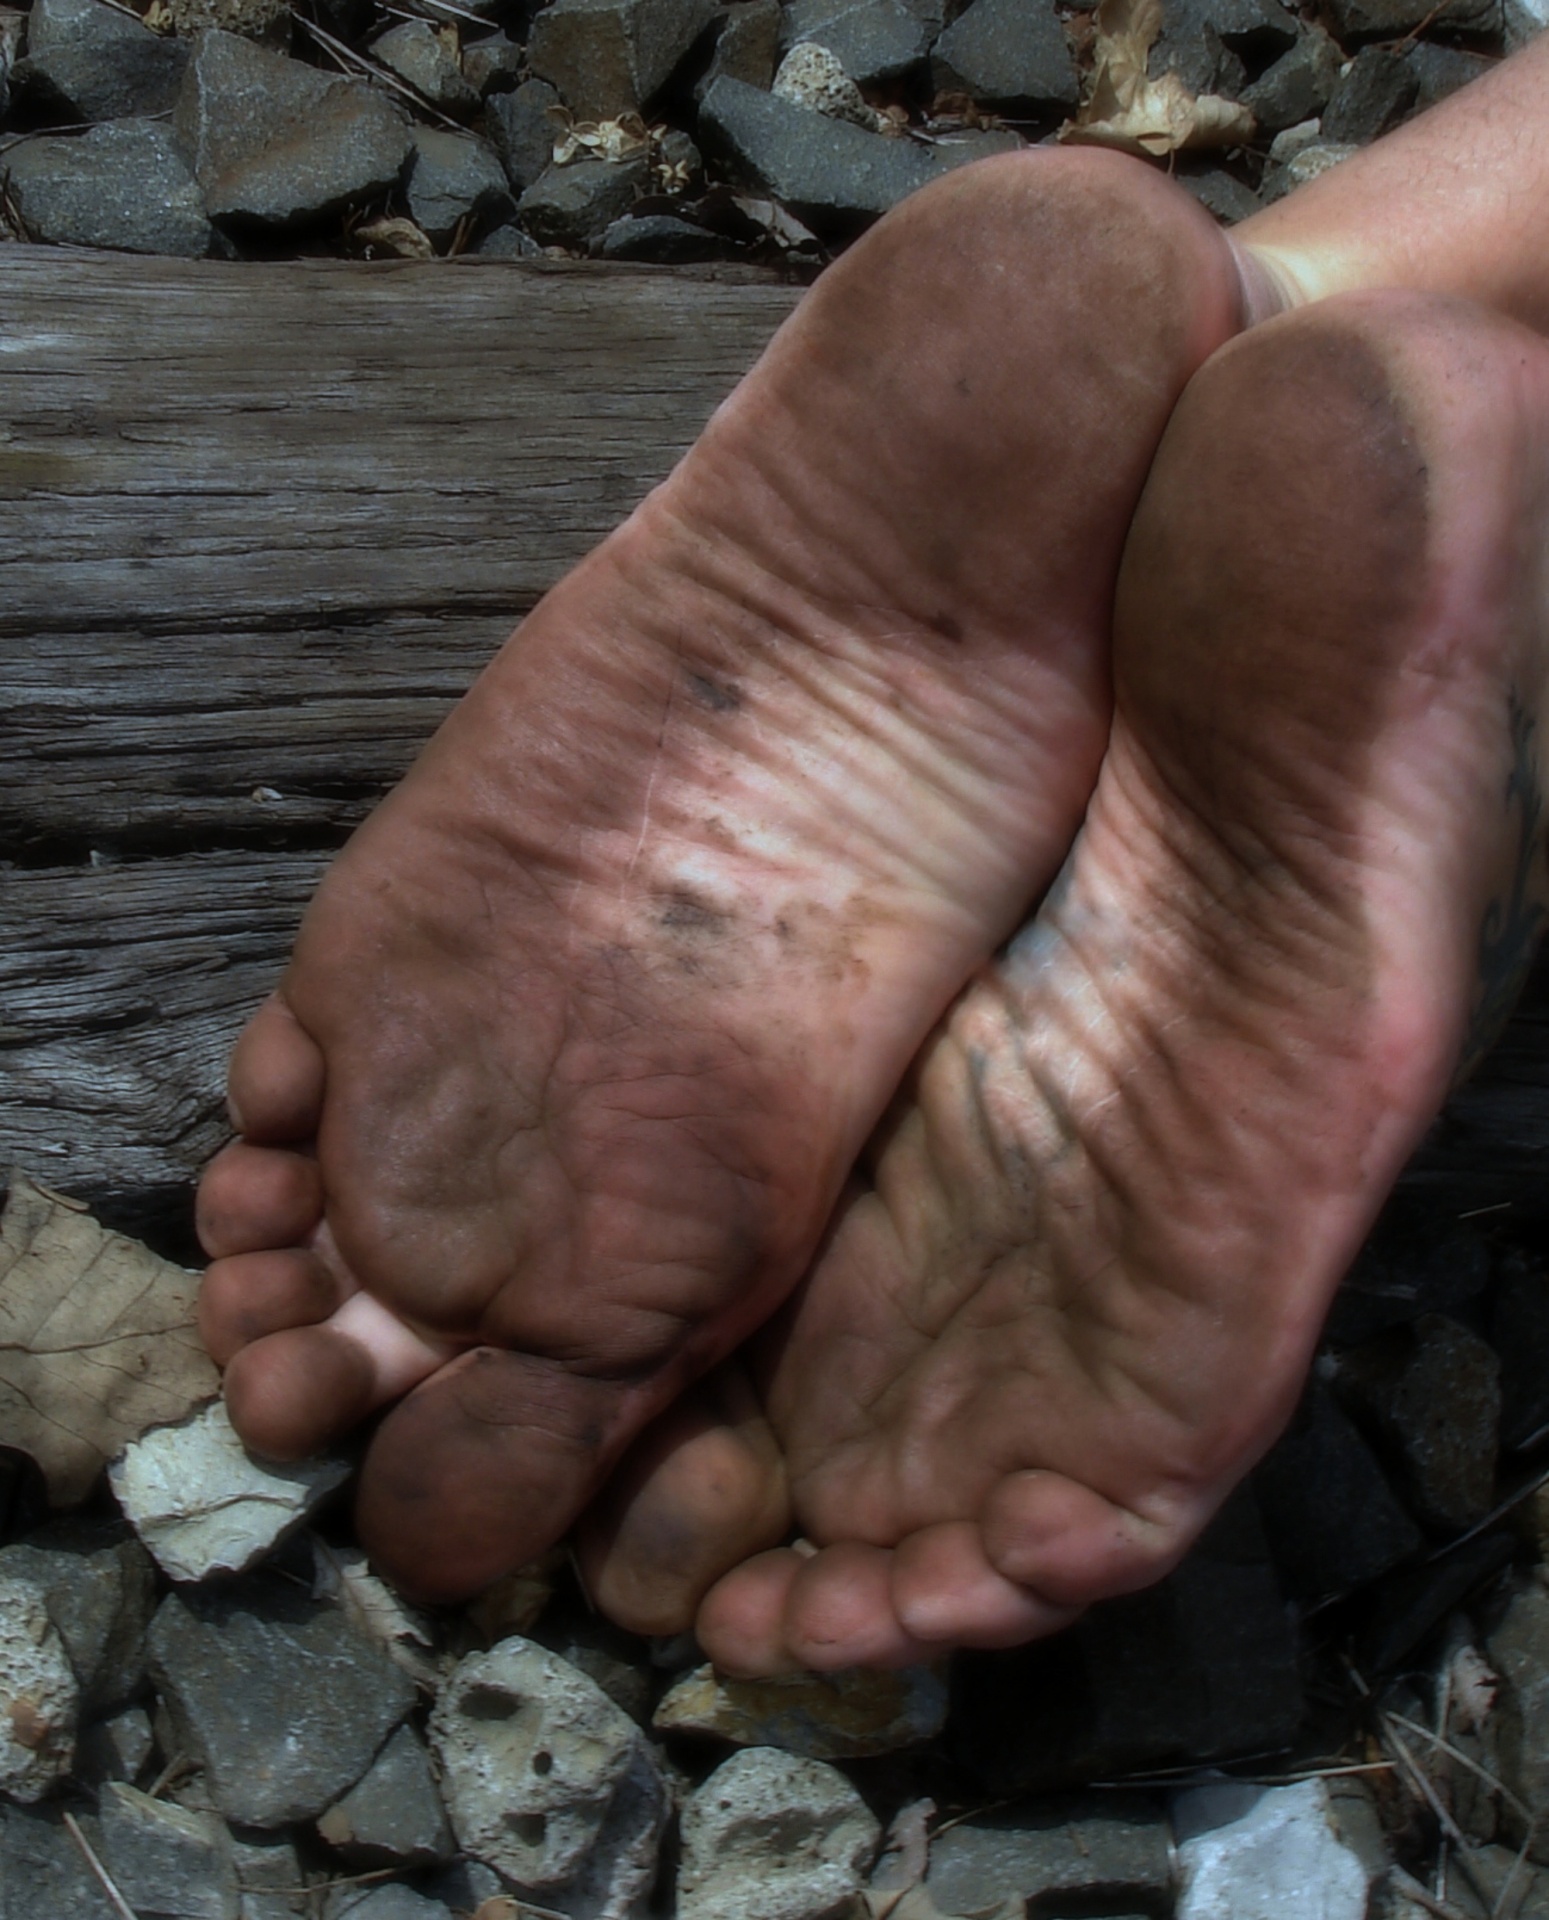 barefoot guy shows his dirty feet